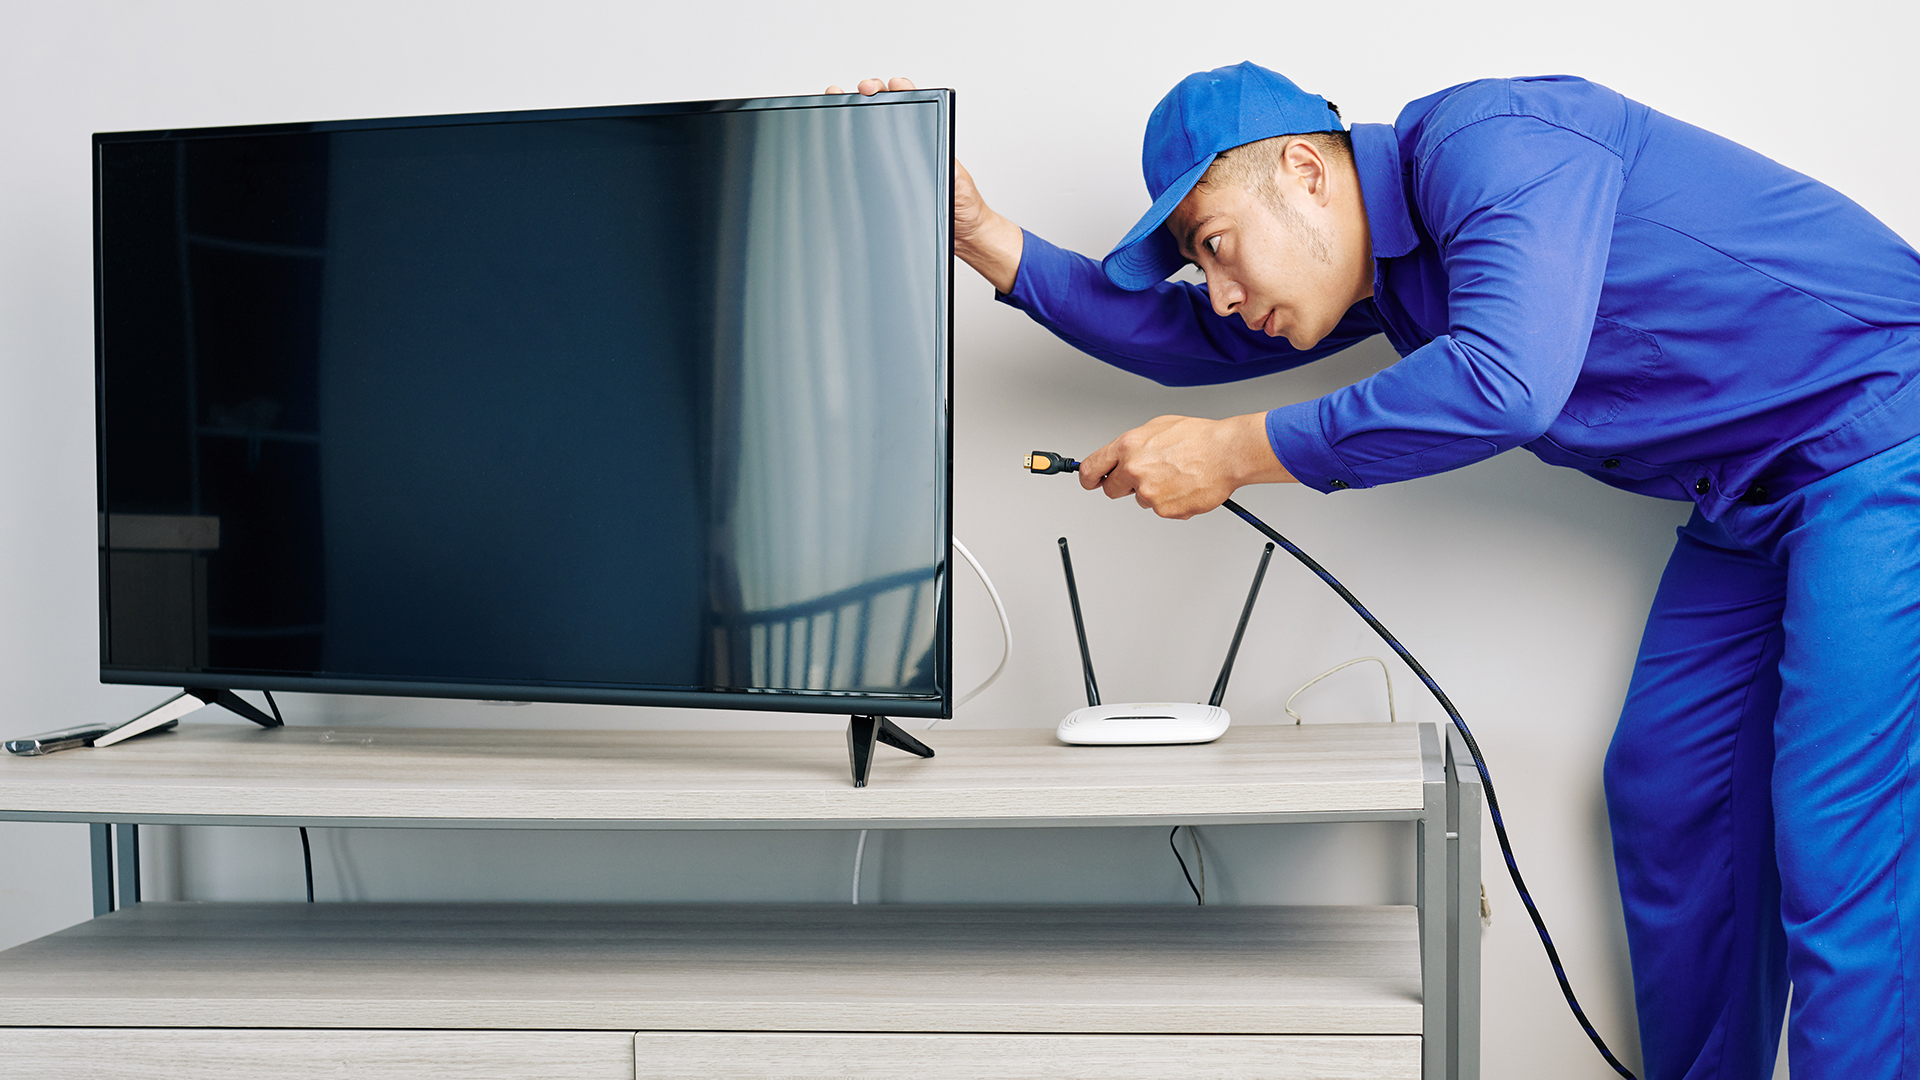 A cable technician plugging a coaxial cable into the back of a flatscreen TV.